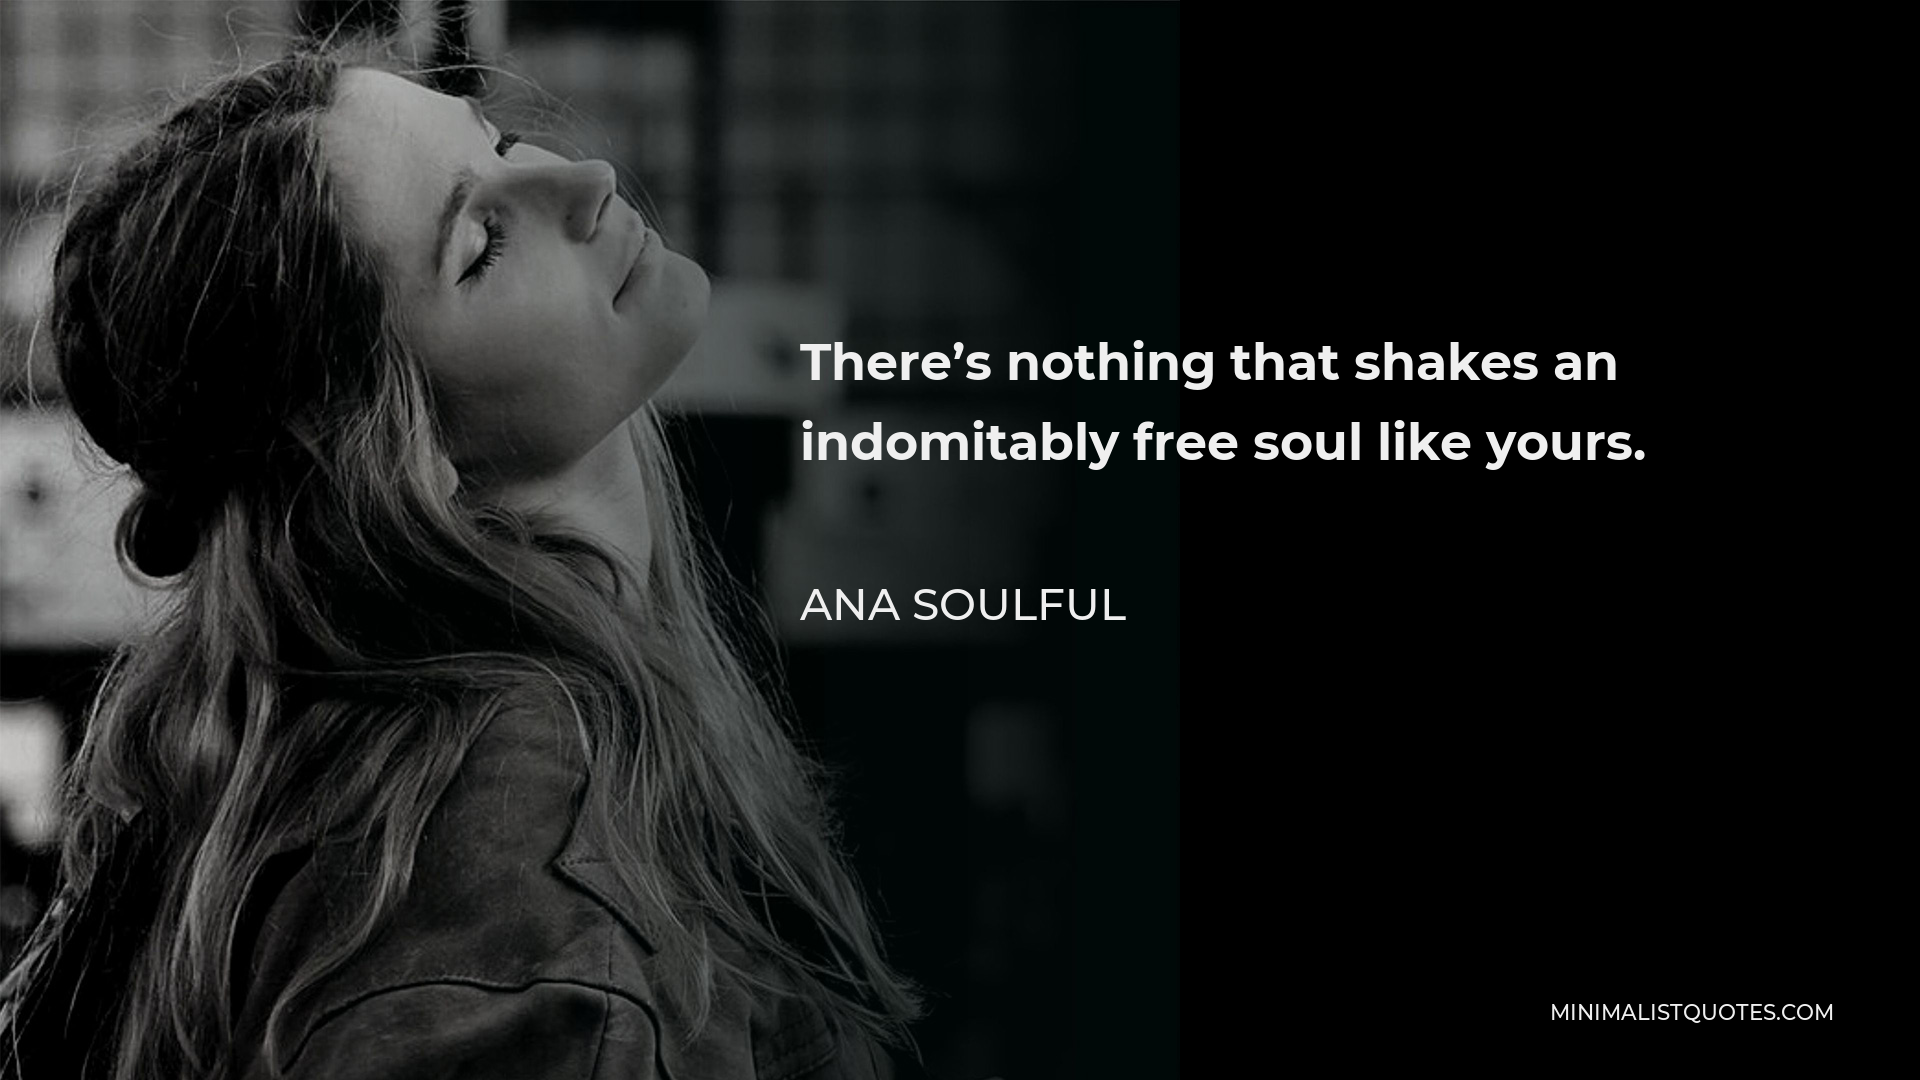 Ana Soulful Quote - There’s nothing that shakes an indomitably free soul like yours.